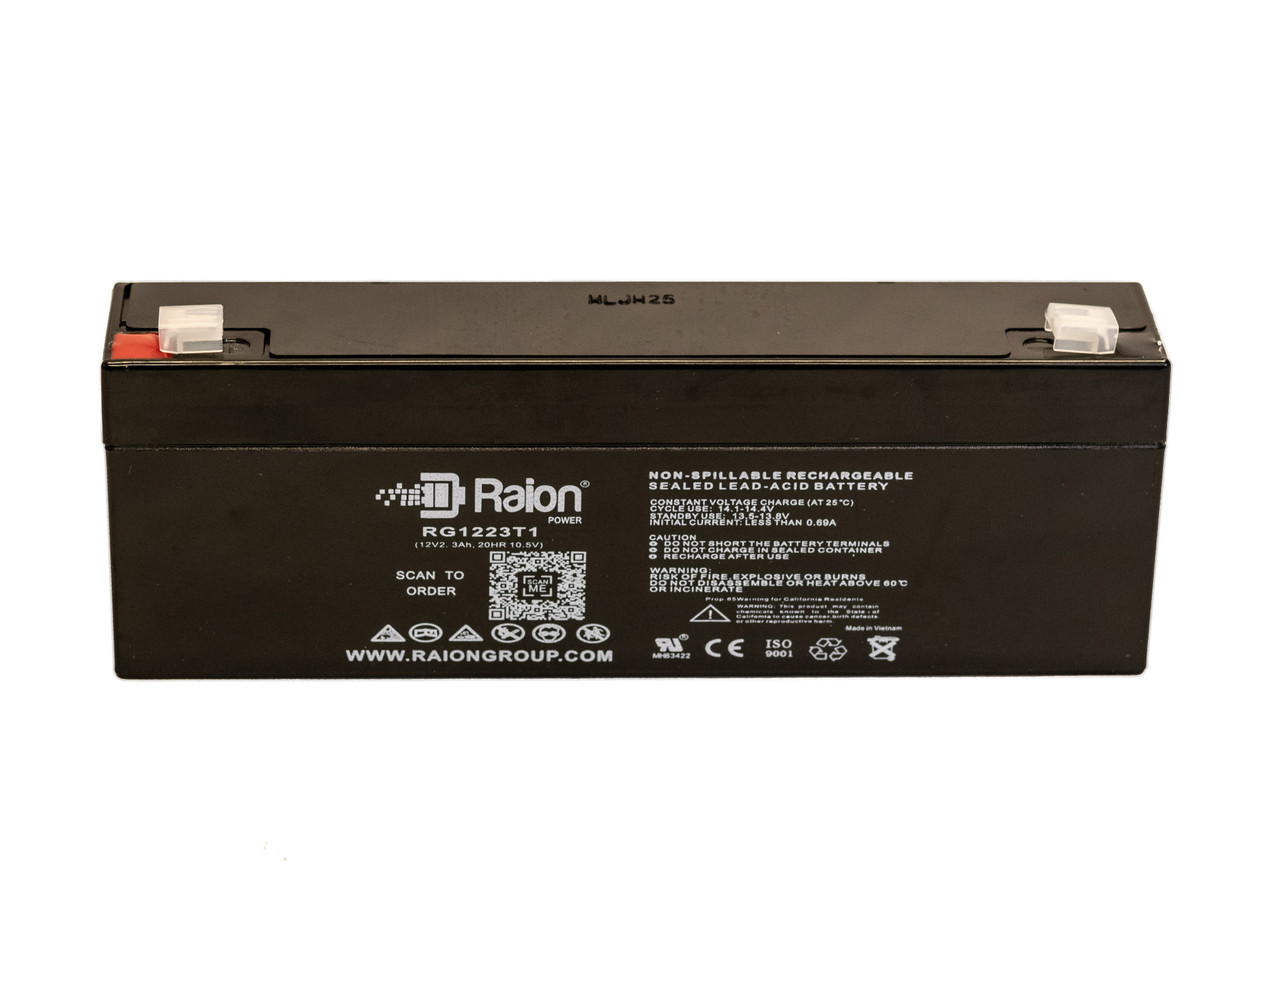 Raion Power 12V 2.3Ah SLA Battery With T1 Terminals For Abbott Laboratories 4000 Plus Infusion System OmniFlow